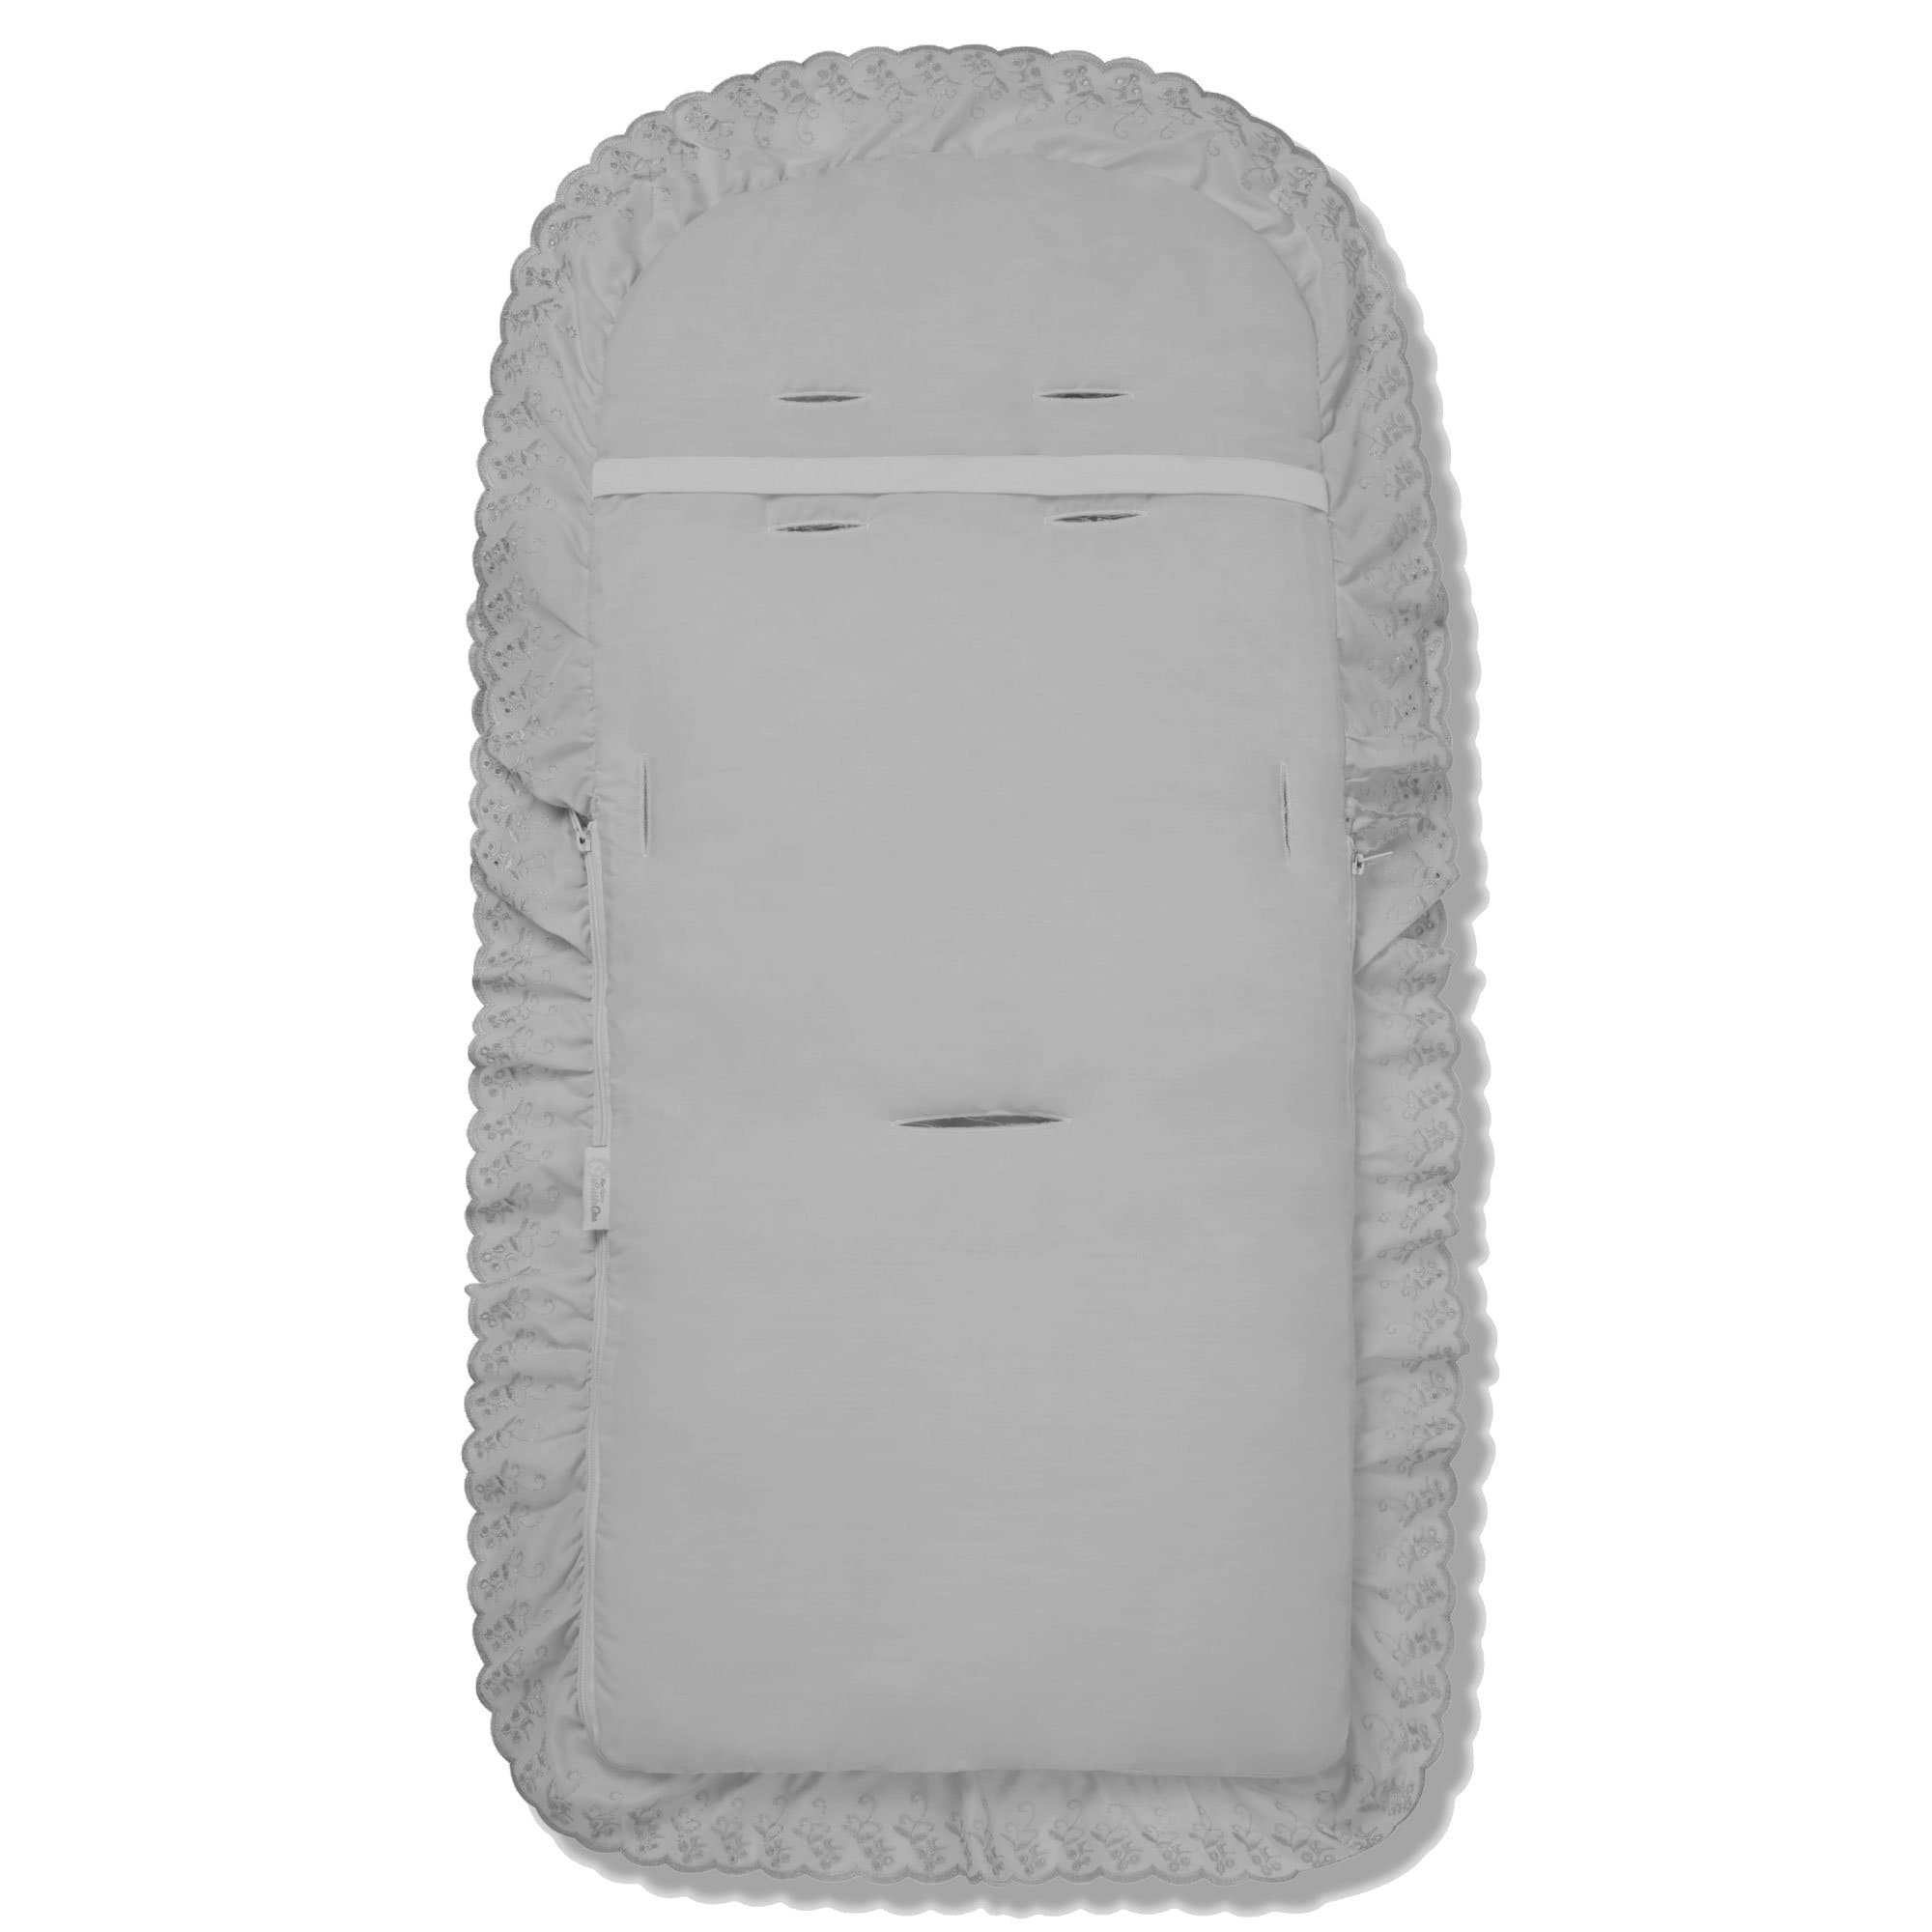 Broderie Anglaise Footmuff / Cosy Toes Compatible with BabyCare - For Your Little One